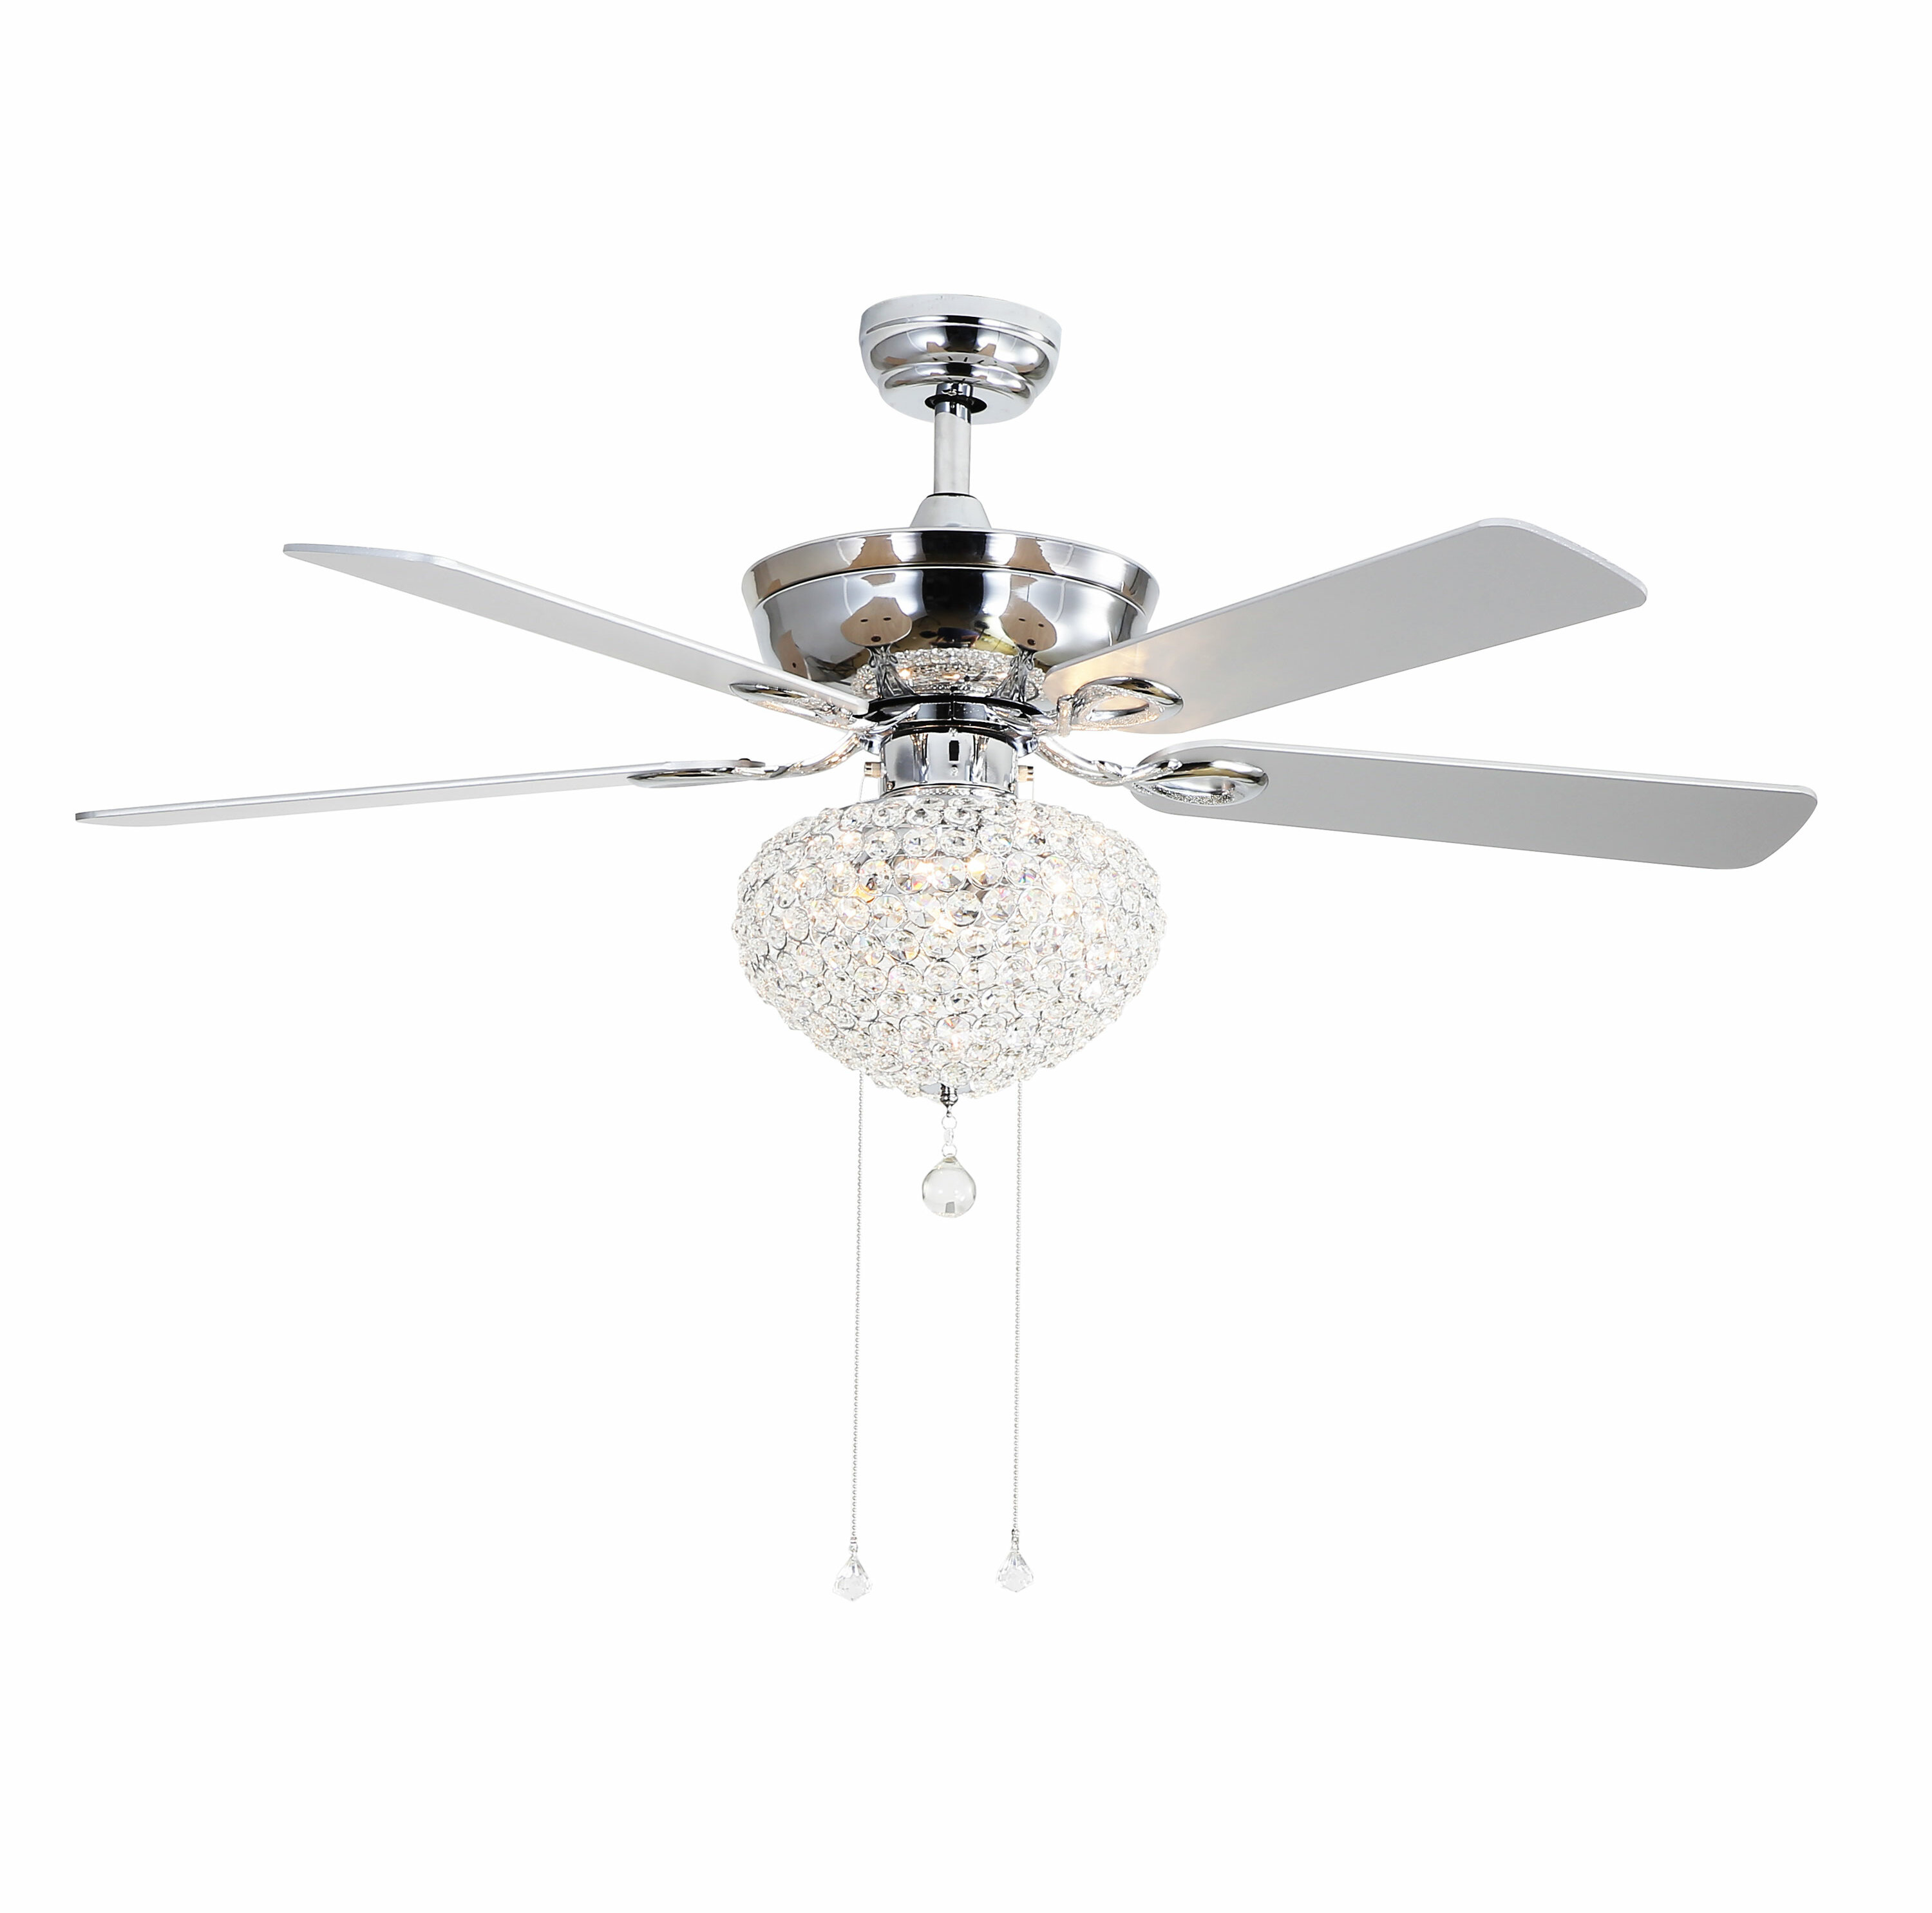 Lanagan 5 Blade Ceiling Fan With Remote